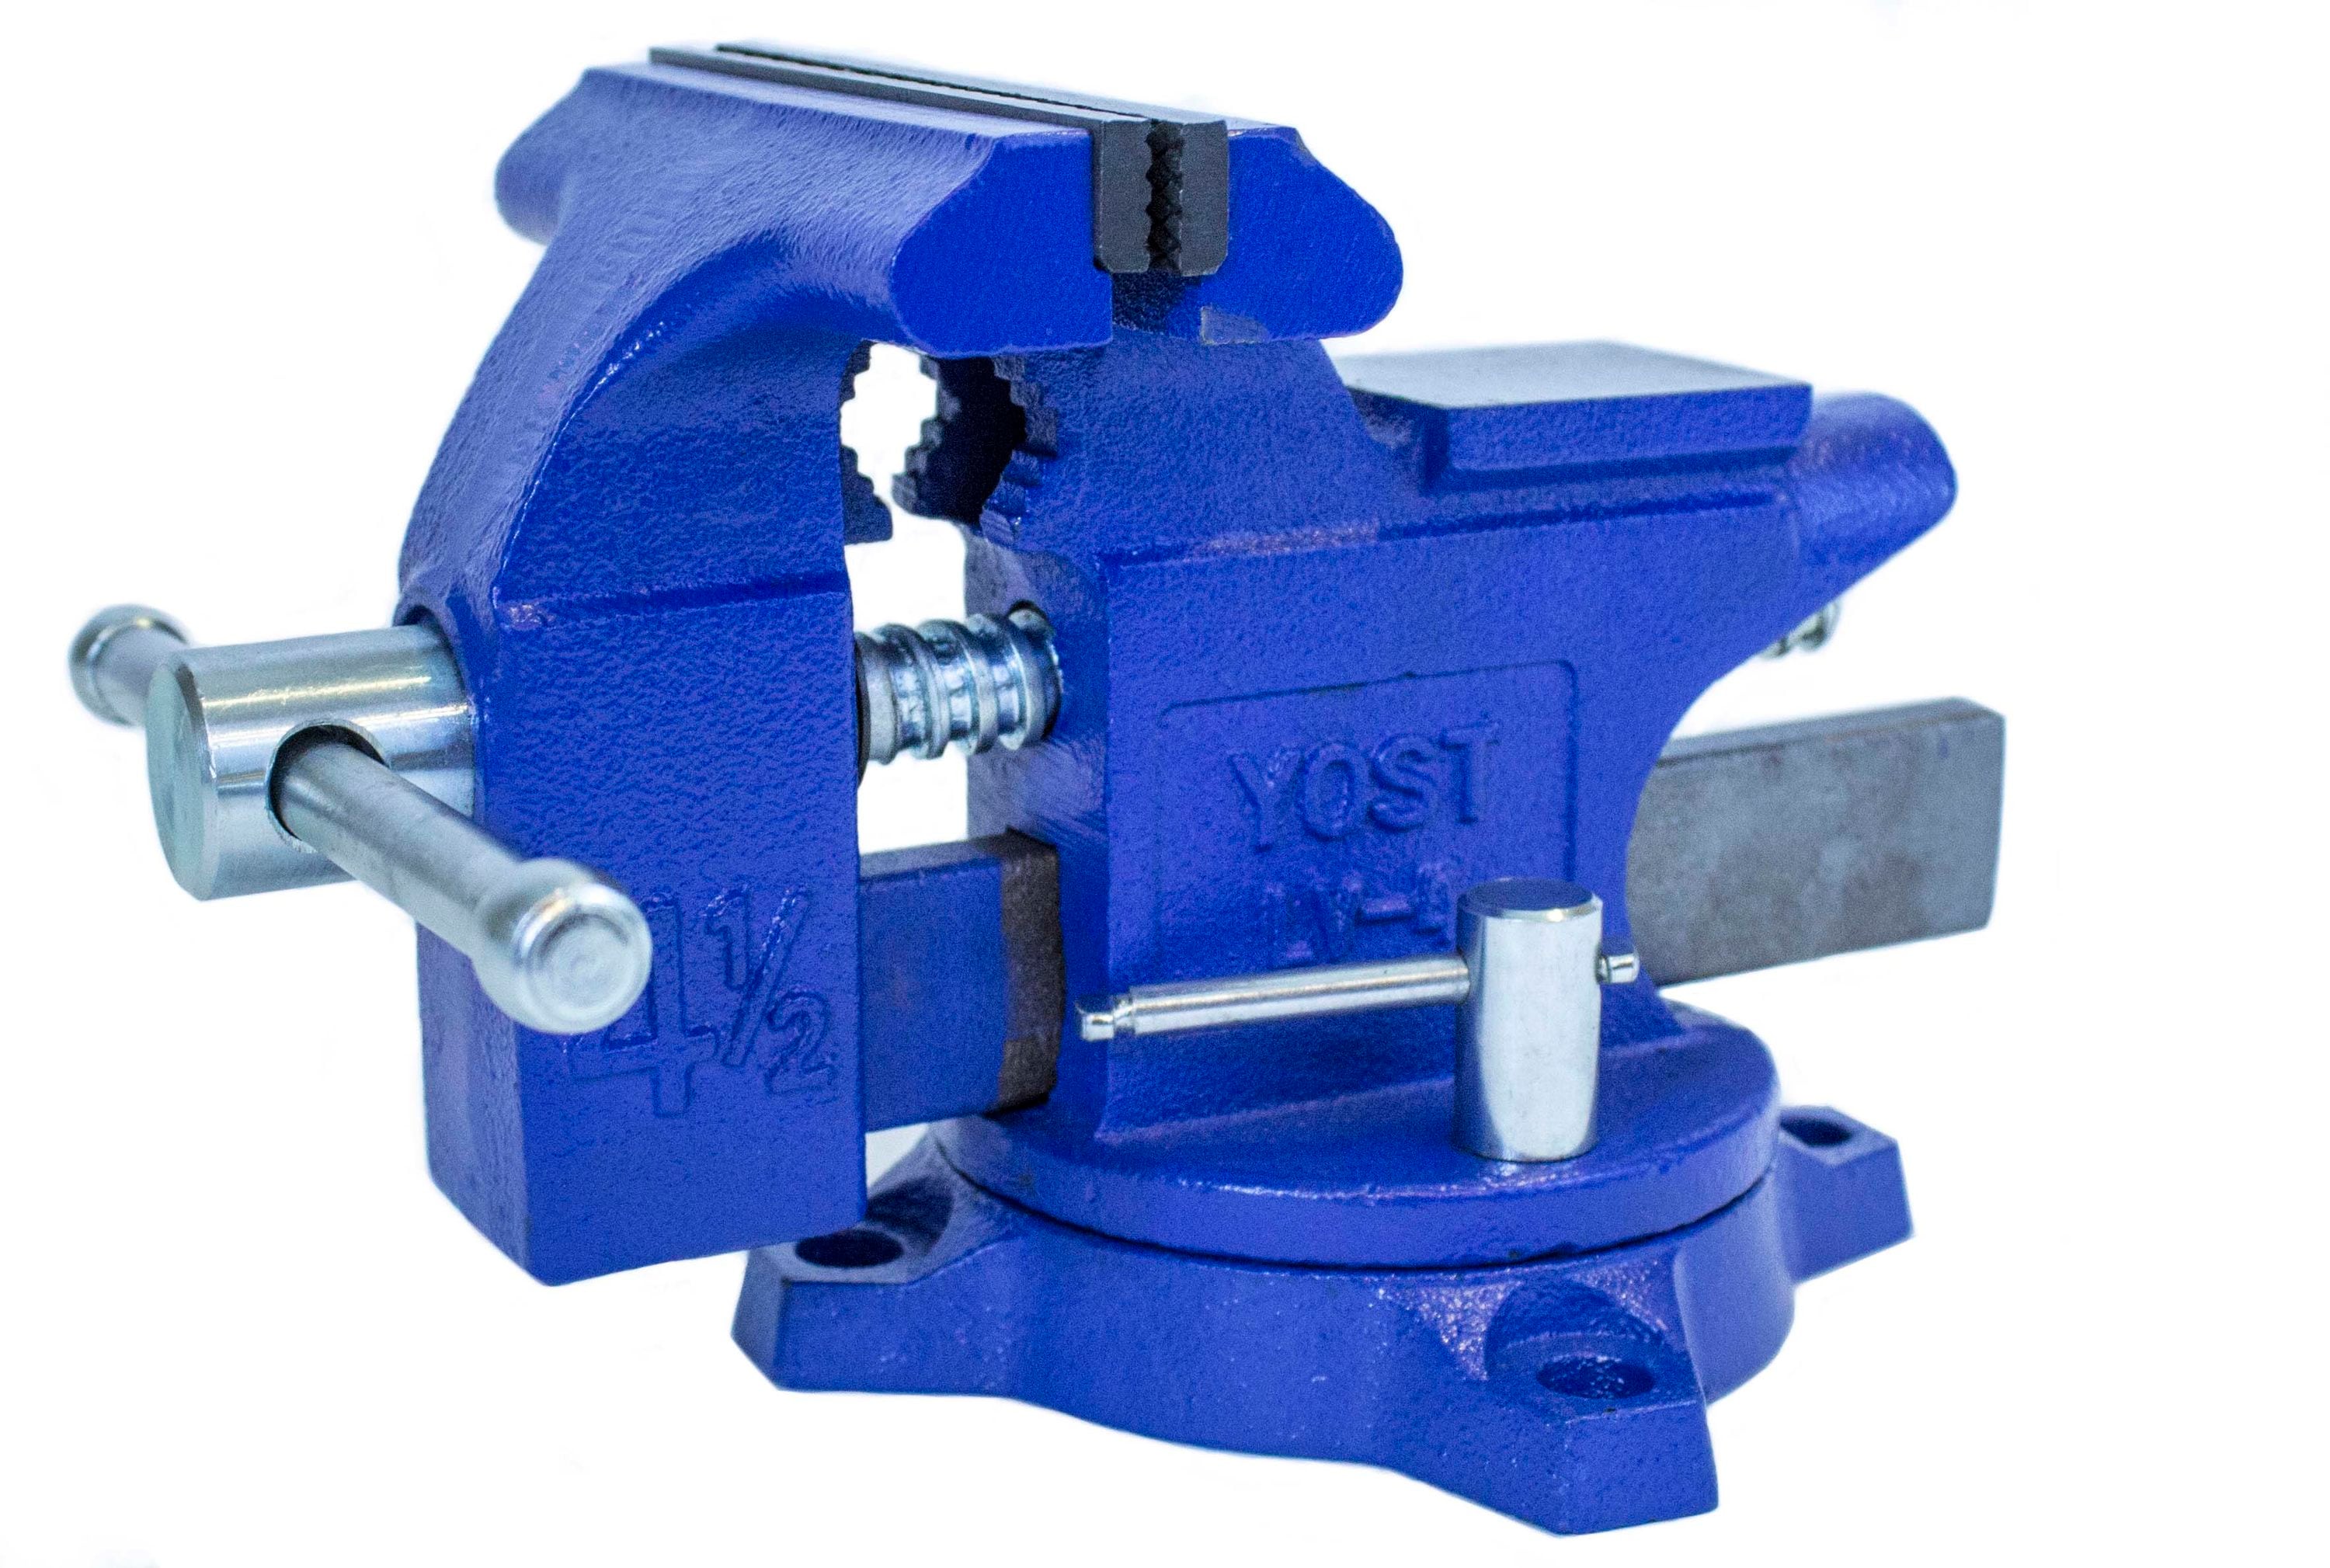 IRWIN 4-in Cast Iron Drill Press Vise in the Vises department at